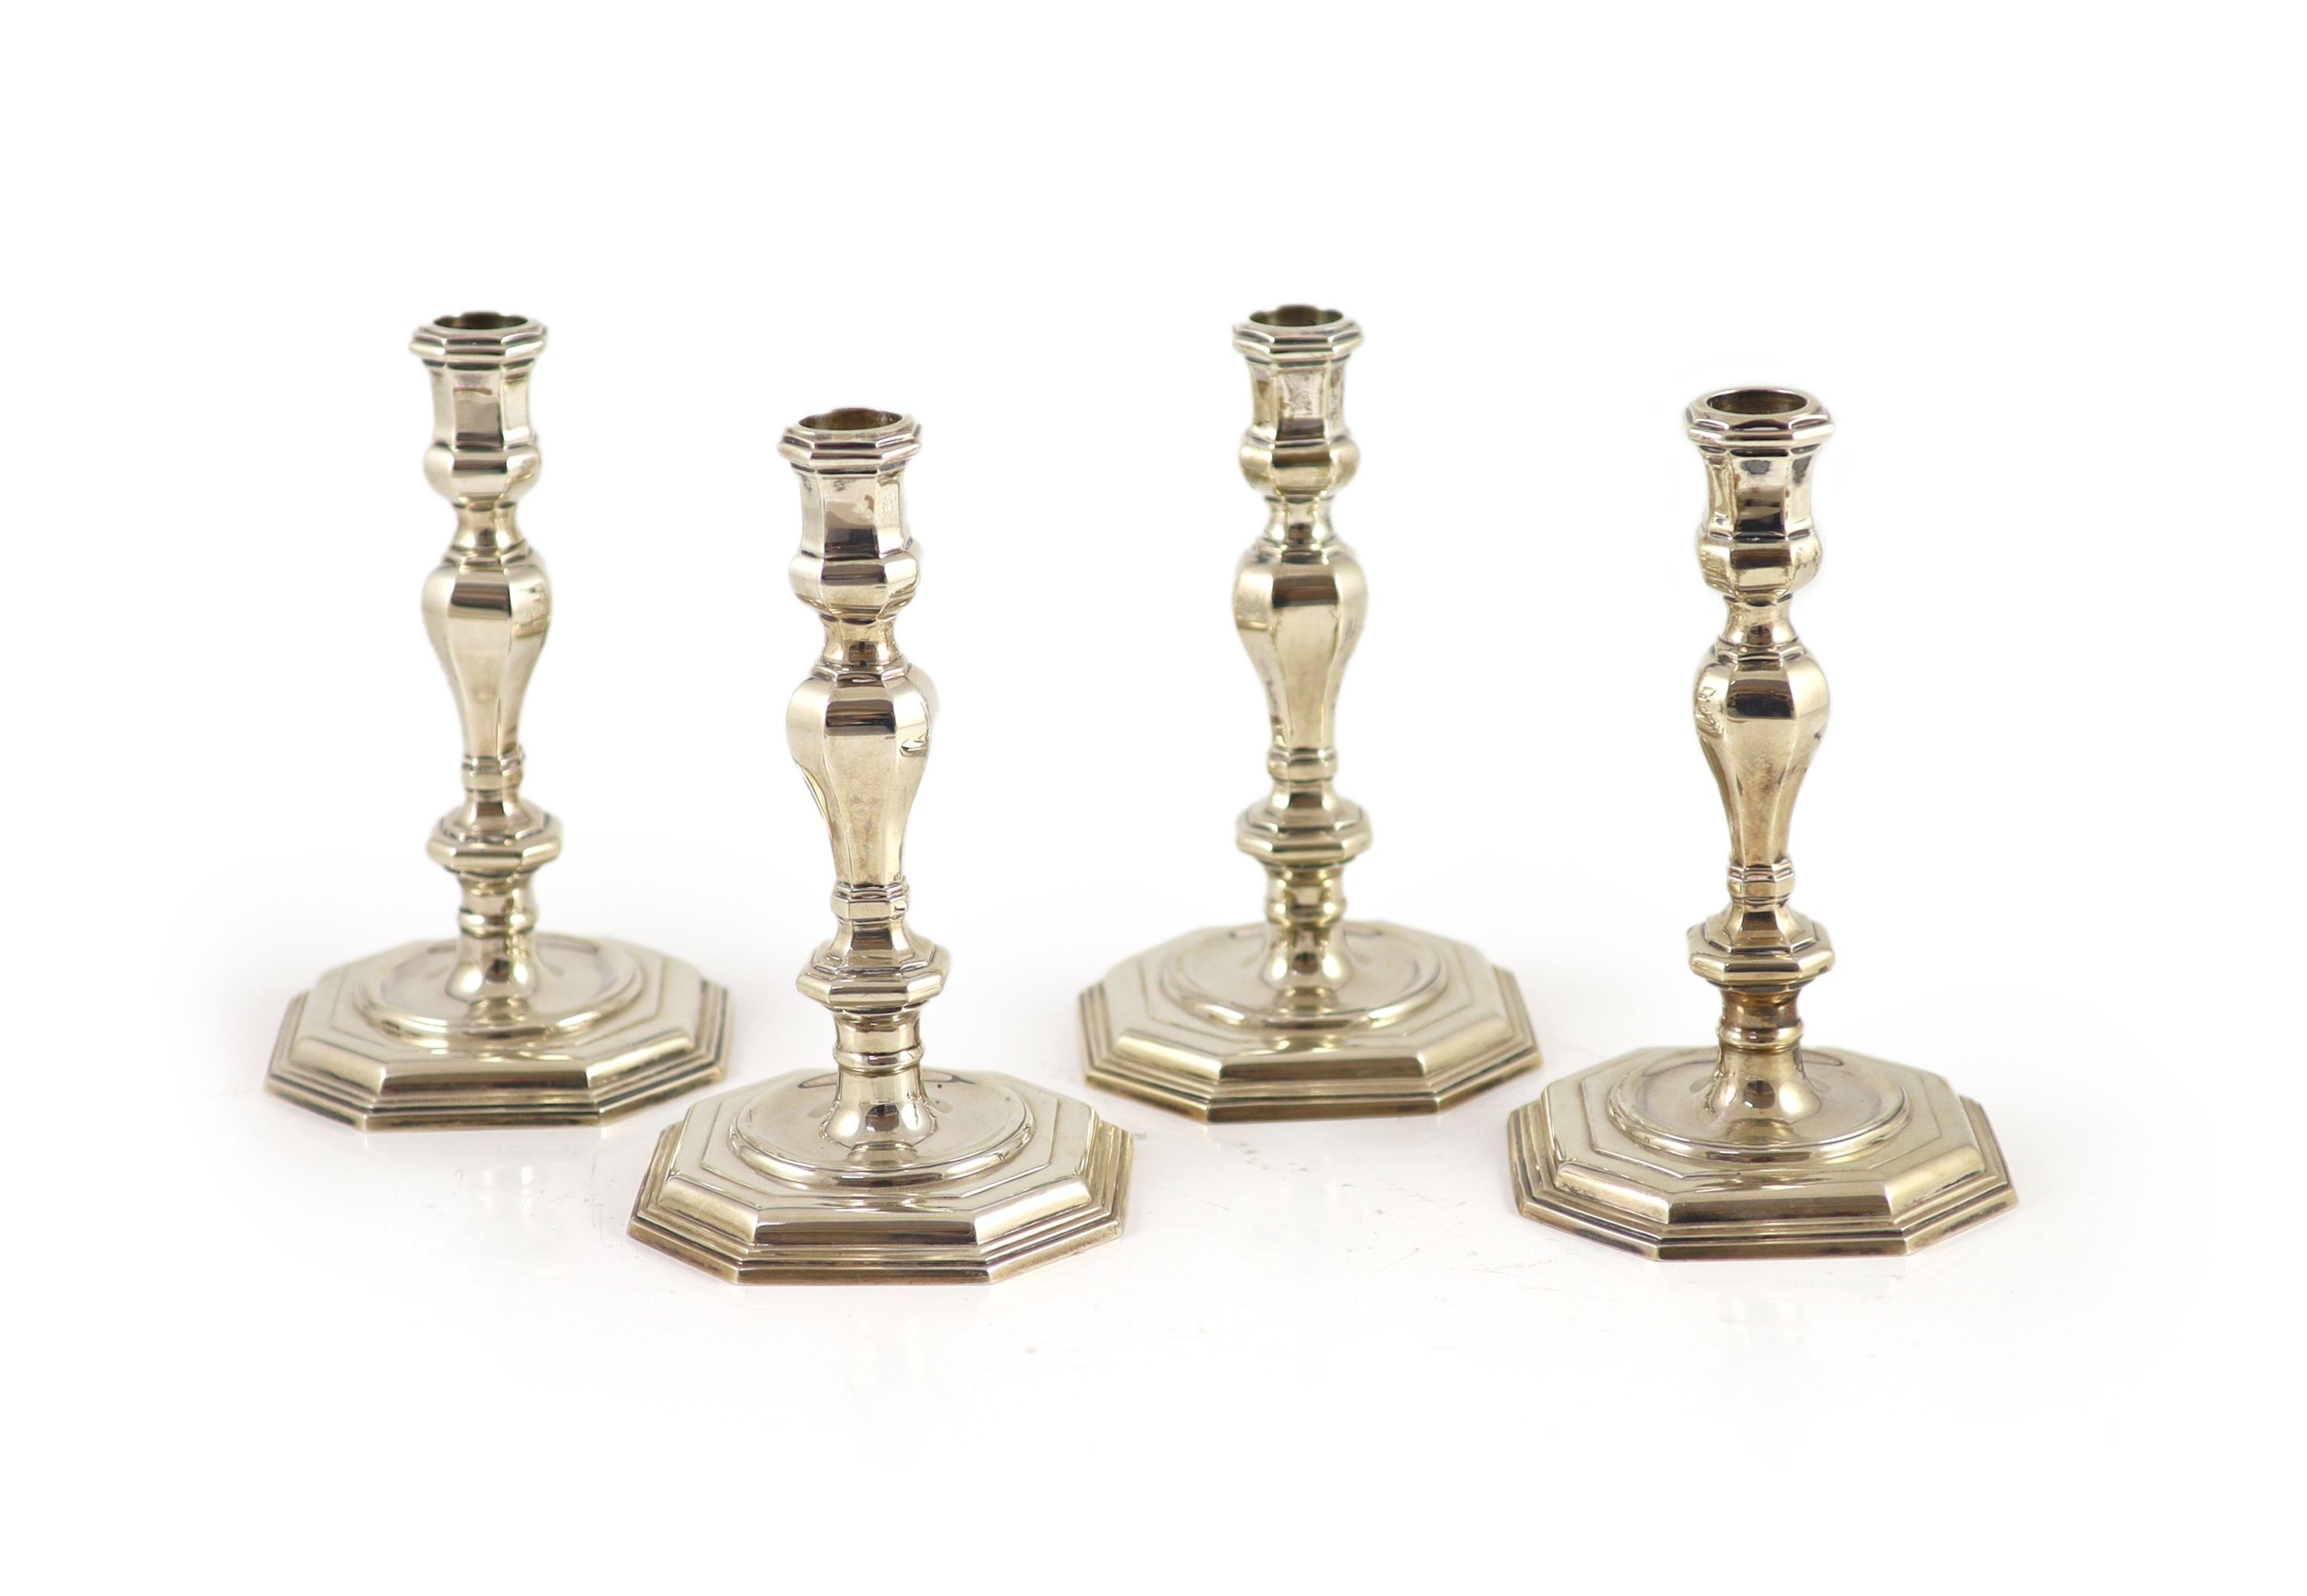 A set of four early 18th century design cast silver candlesticks